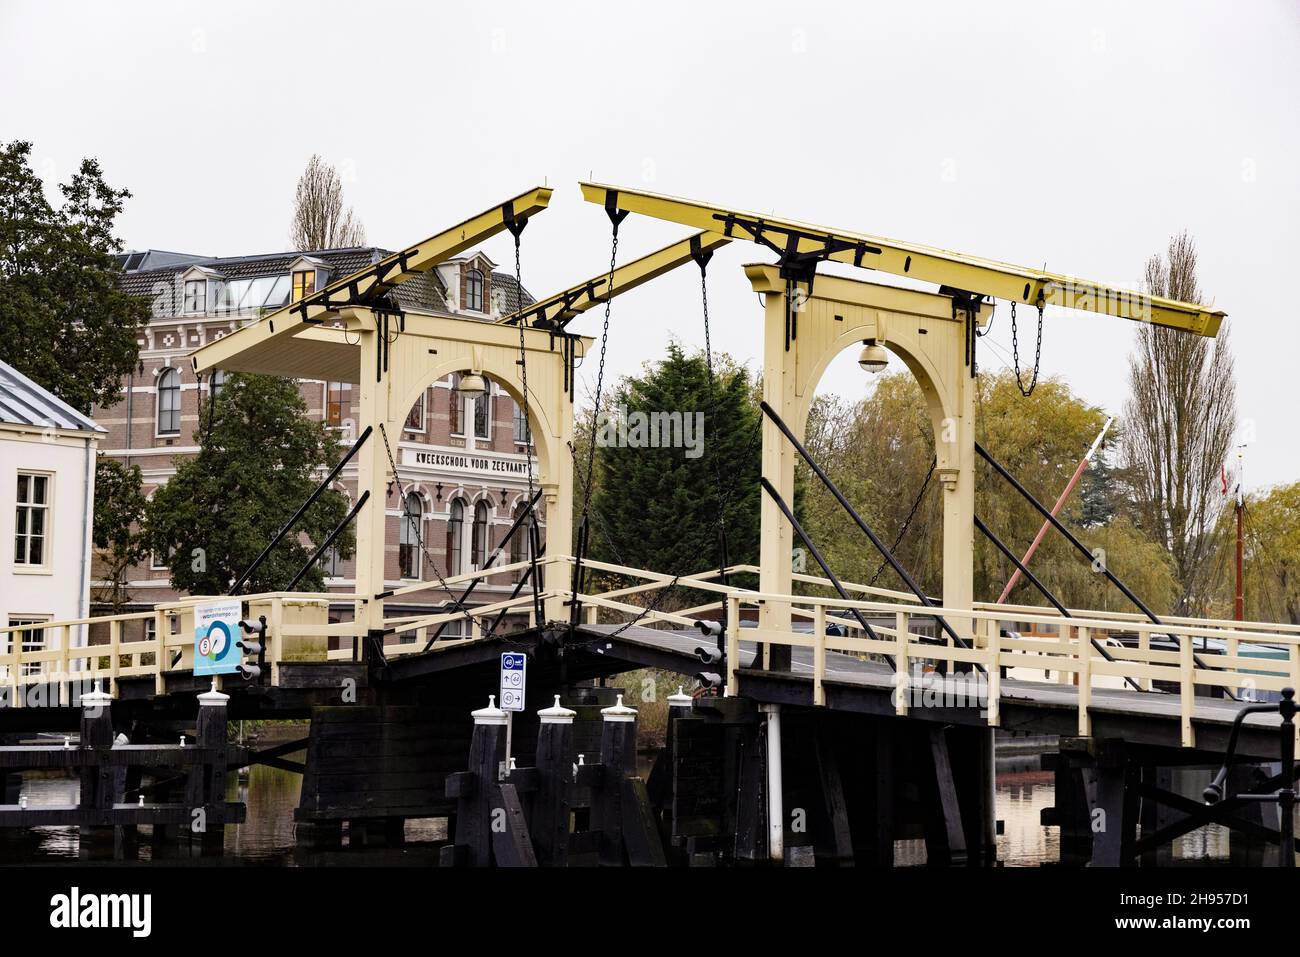 The Rembrandtbrug (Rembrandt bridge) is a drawbridge on the Galgewater of the Rhine River in Leiden, Netherlands. Stock Photo